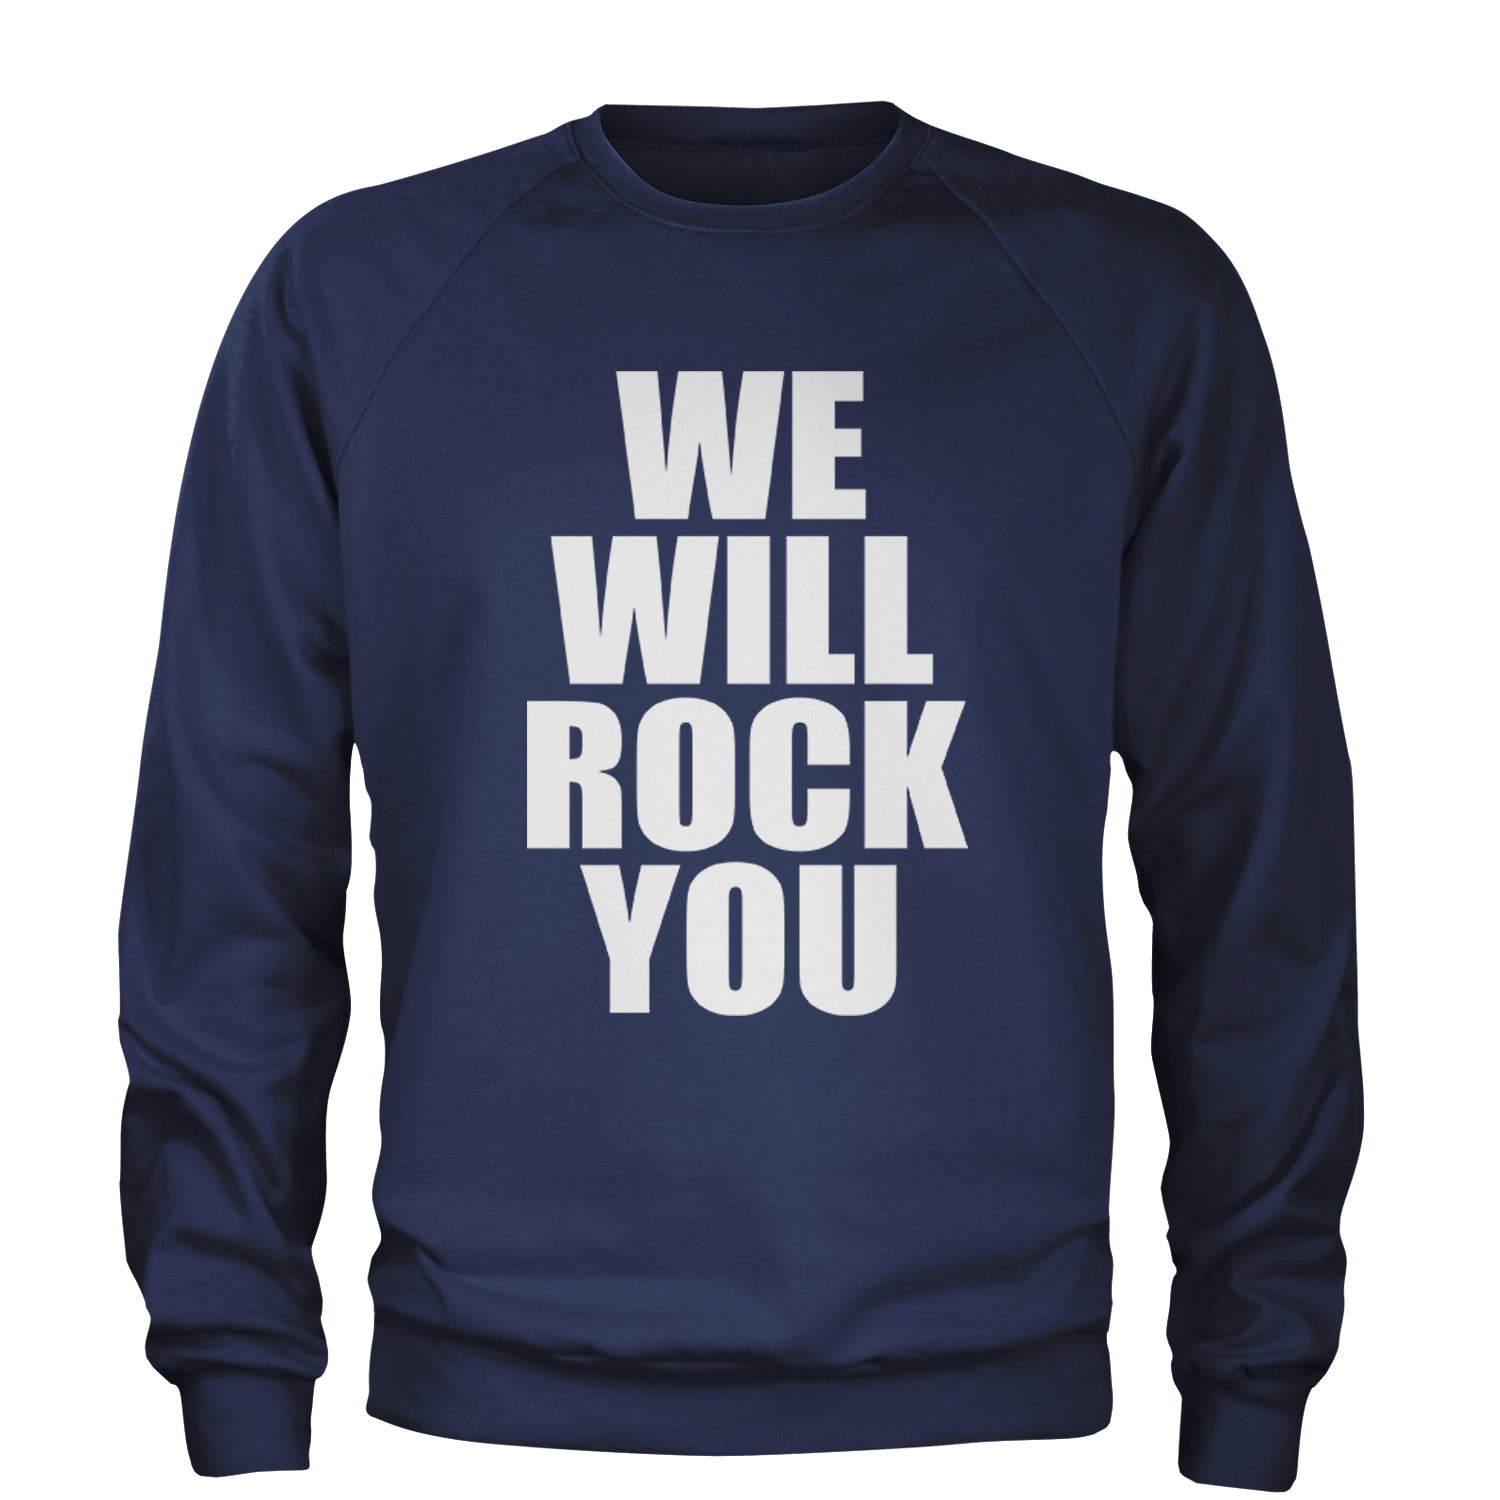 We Will Rock You Adult Crewneck Sweatshirt #expressiontees by Expression Tees